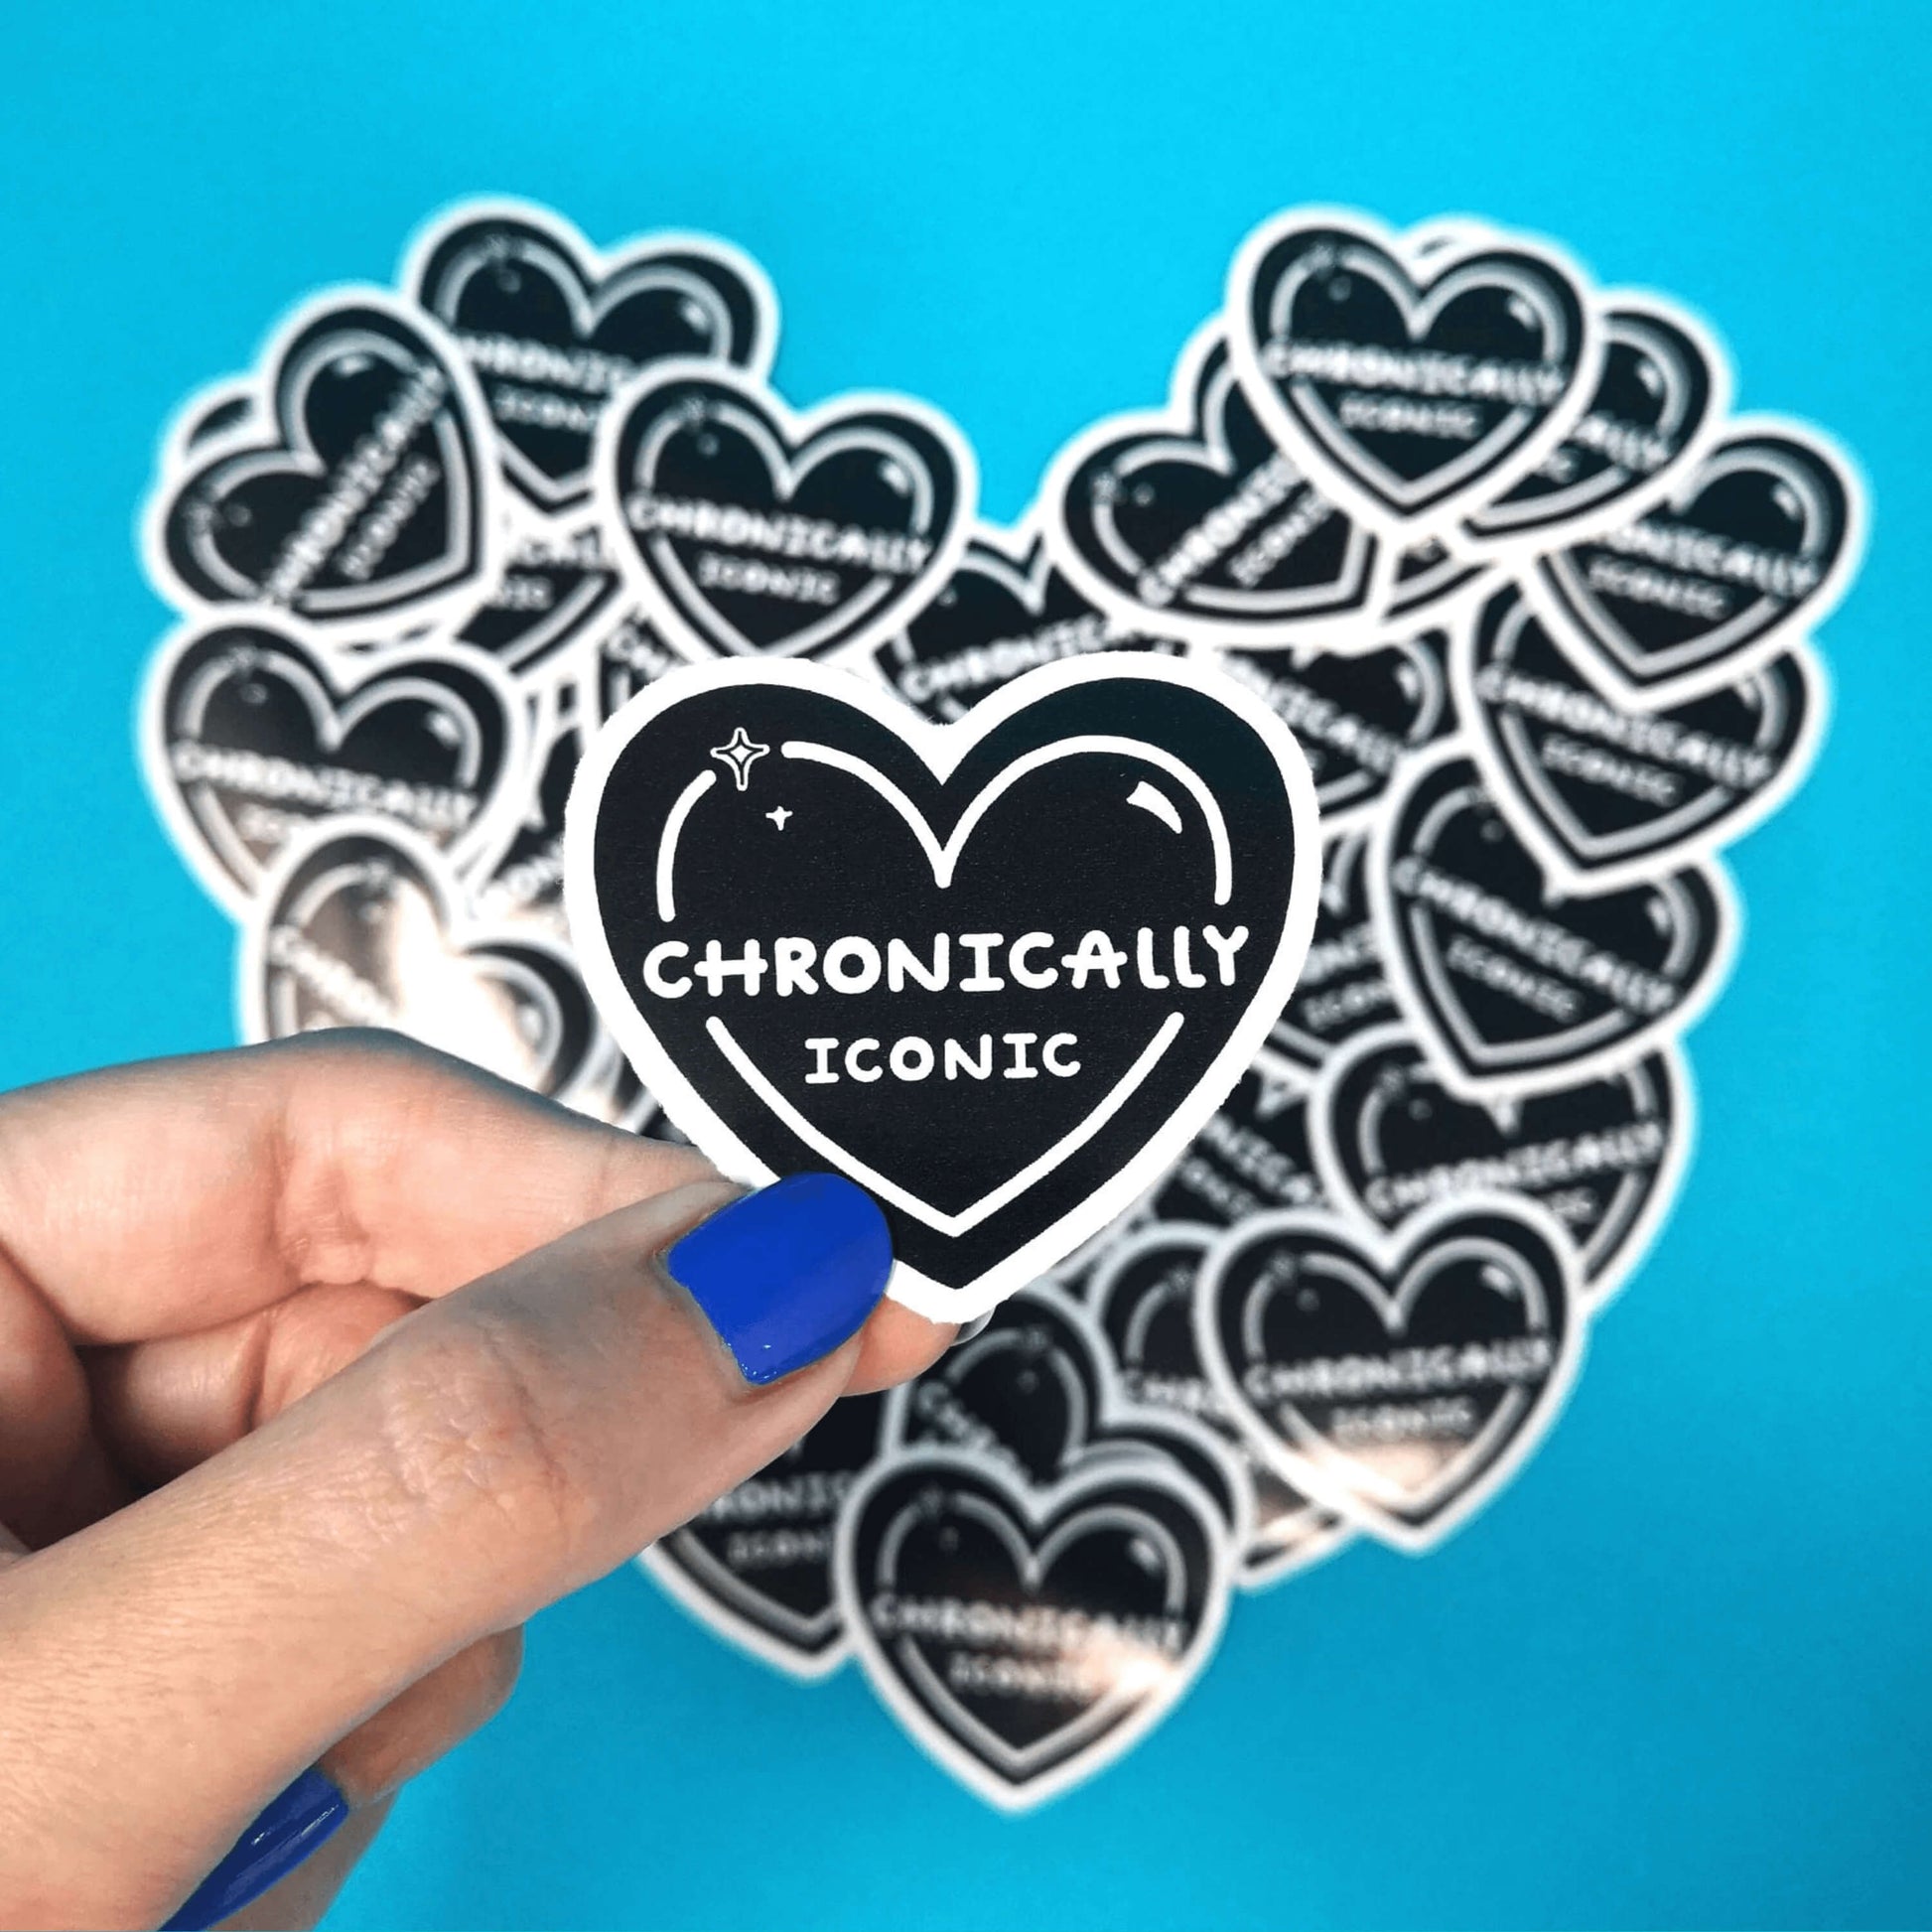 The Chronically Iconic Sticker being held over a blue background and multiple copies of the sticker pushed into the shape of a heart by a hand with blue nail varnish. The black heart shaped sticker has a white outline with sparkles and centre text reading 'chronically iconic'. The design is raising awareness for chronic illness and invisible illness.